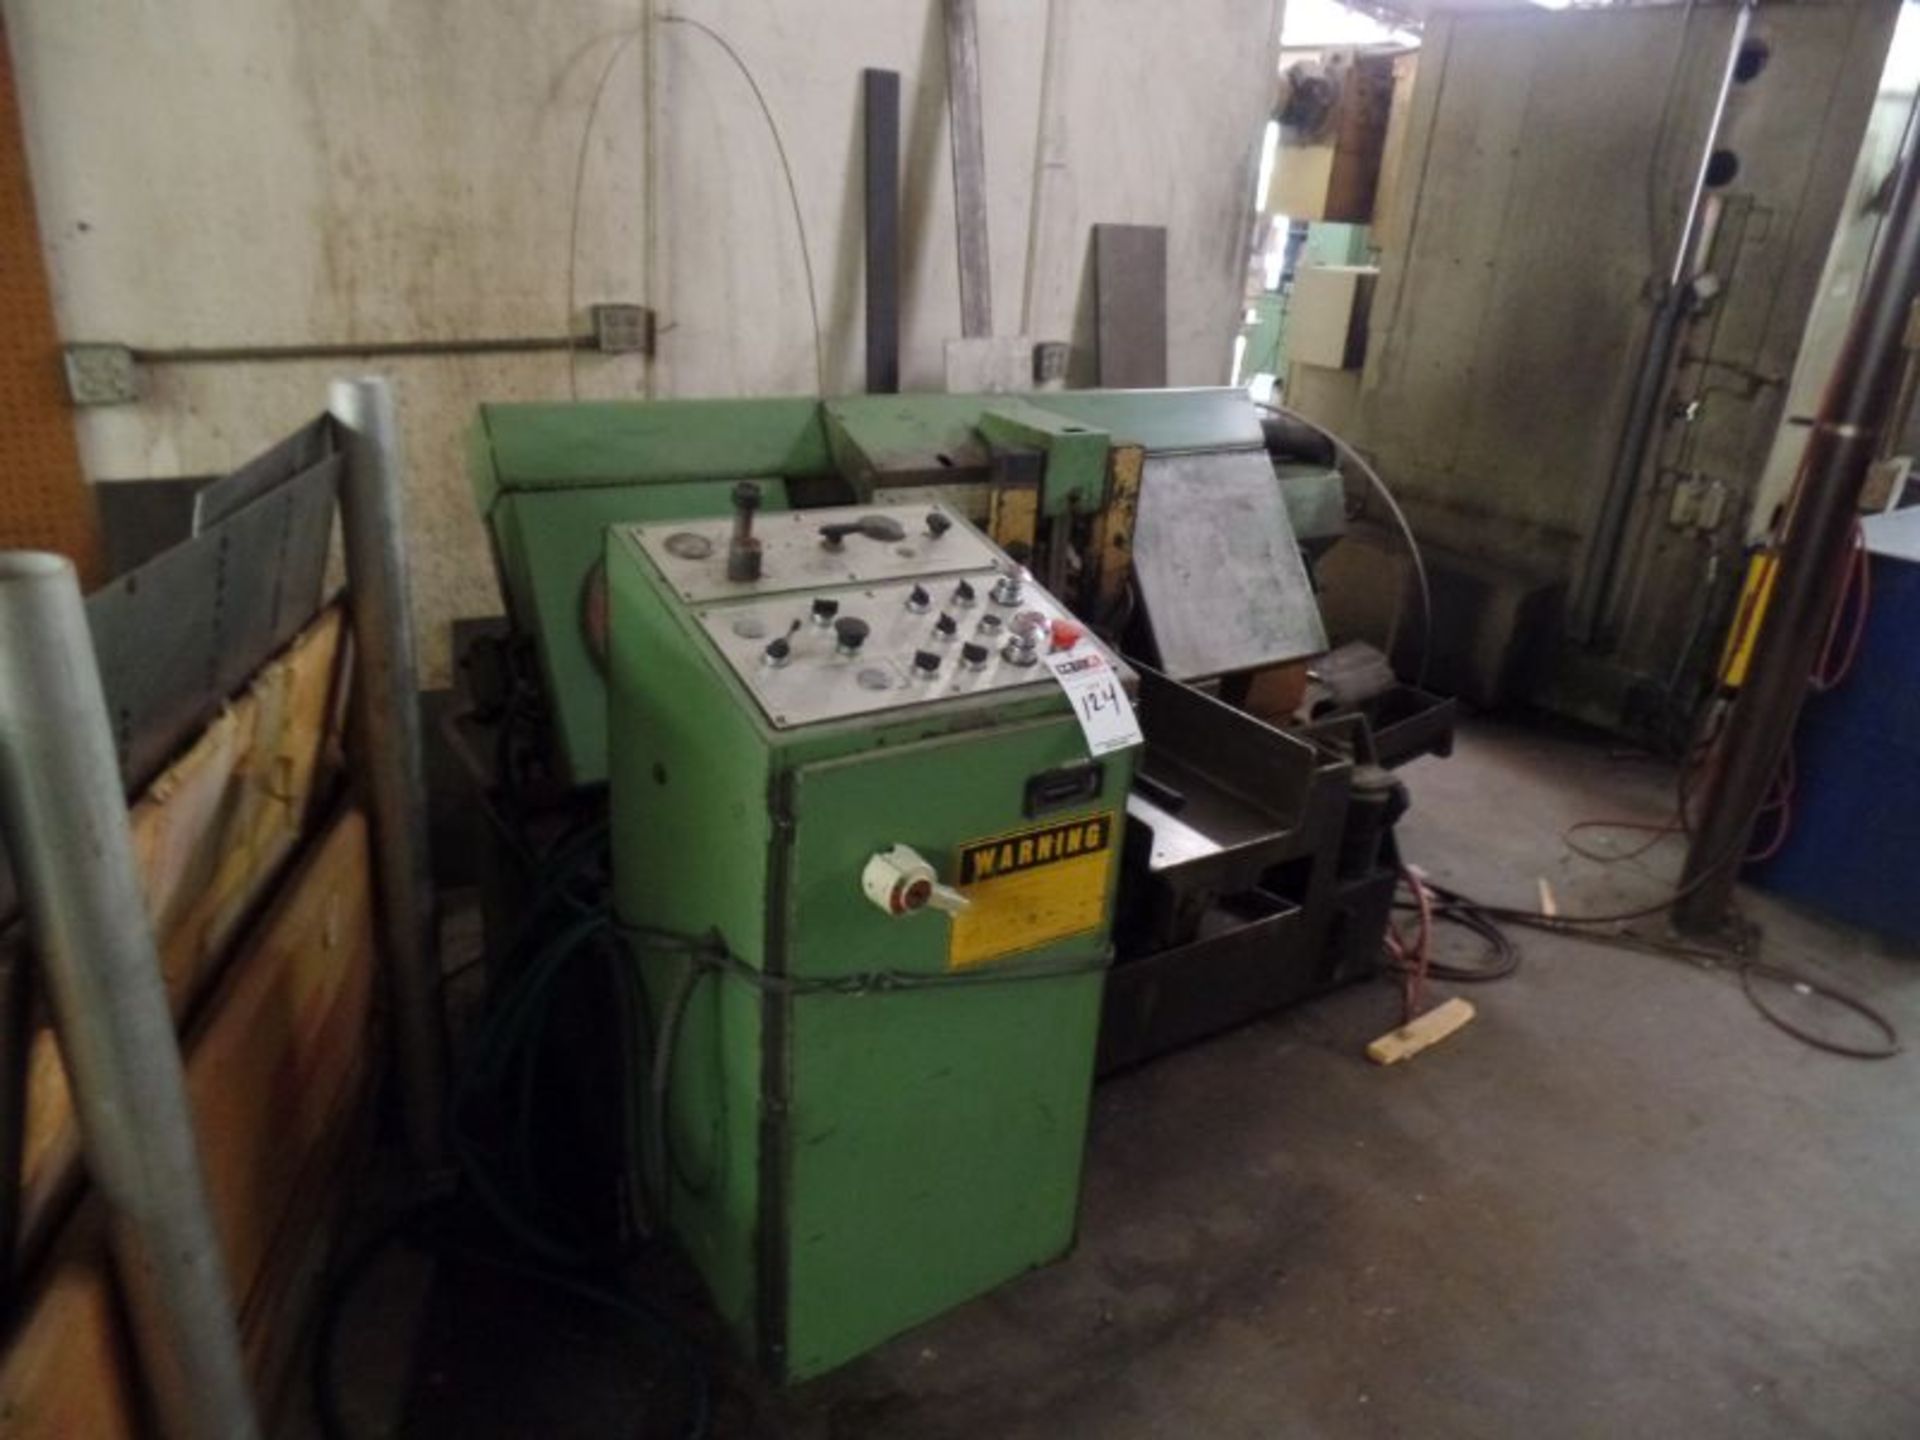 DoALL C-260A Automatic Horiz. Band Saw, 10 1/4" x 12" capacity, power infeed table, new 1988 - Image 2 of 4